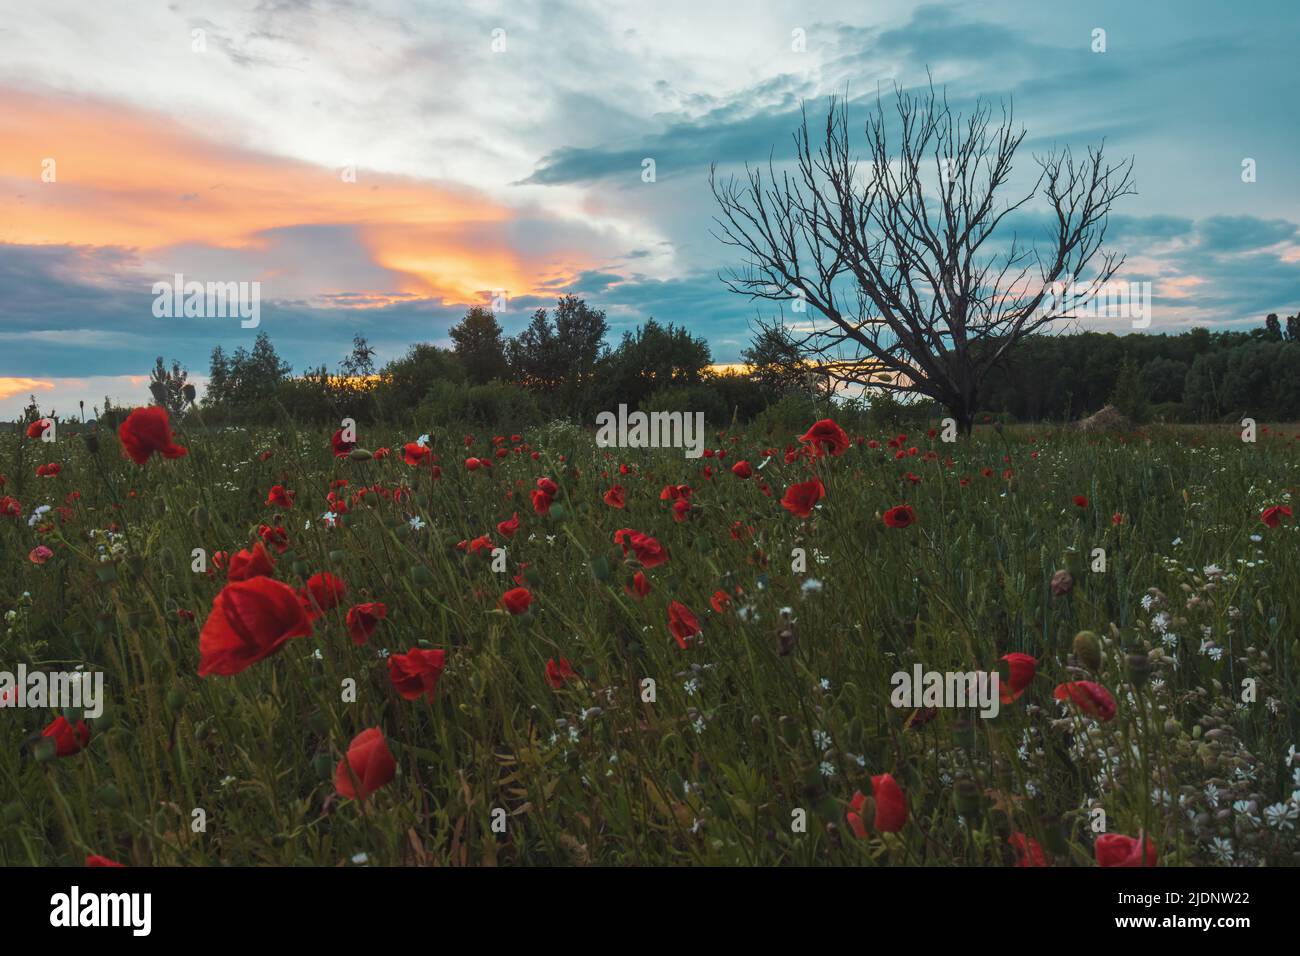 lonely tree at sunset and red poppies Stock Photo